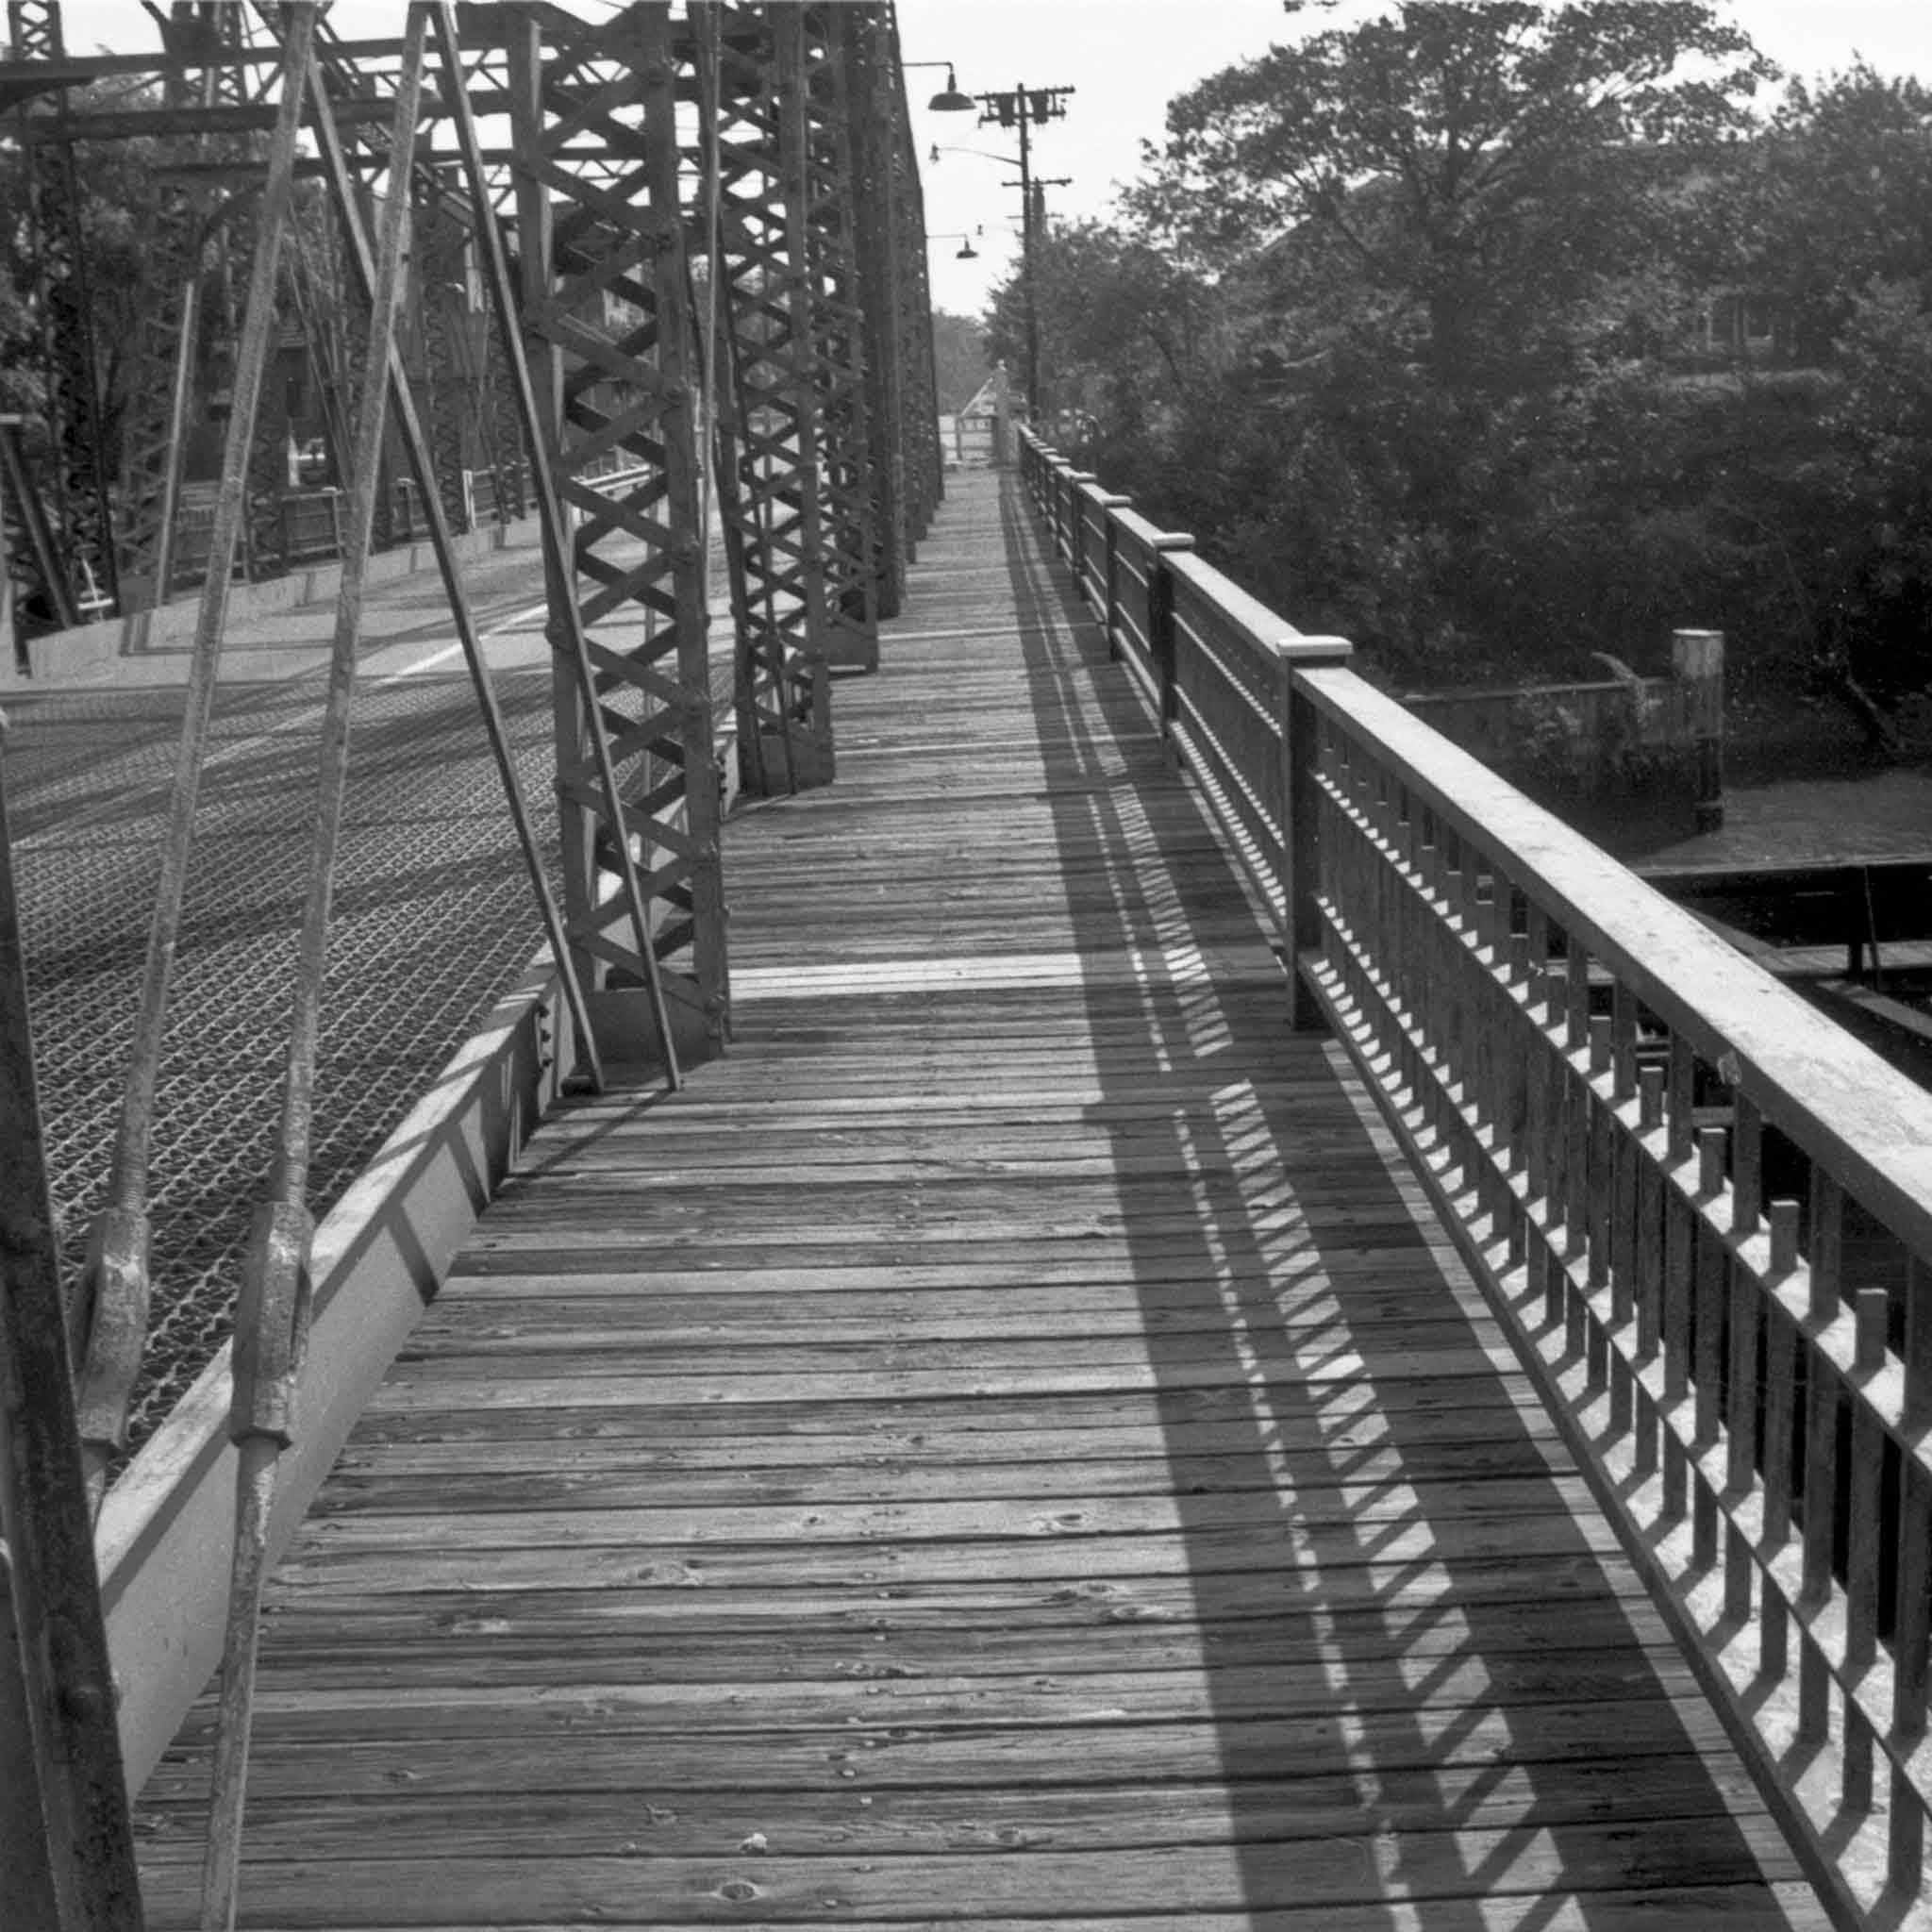 black and white image of a wooden walkway on a metal truss bridge with trees in the background